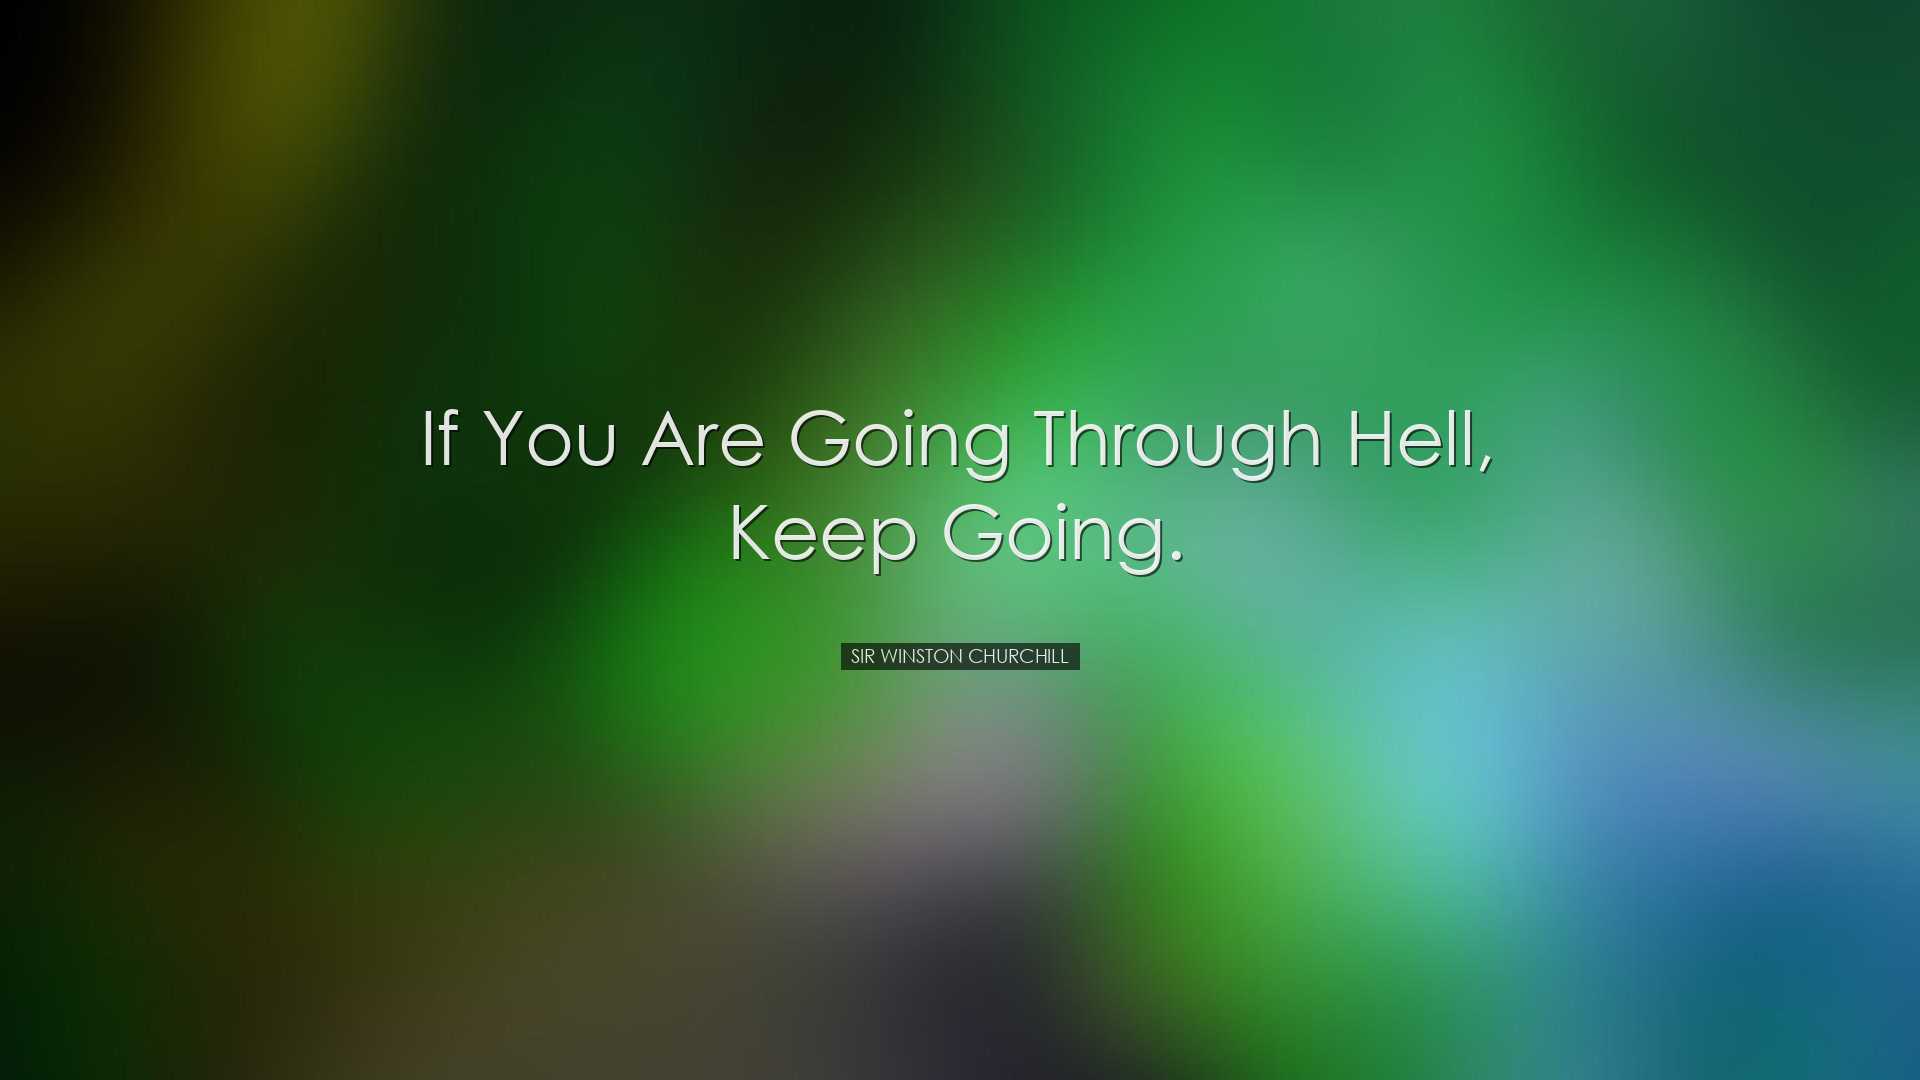 If you are going through hell, keep going. - Sir Winston Churchill